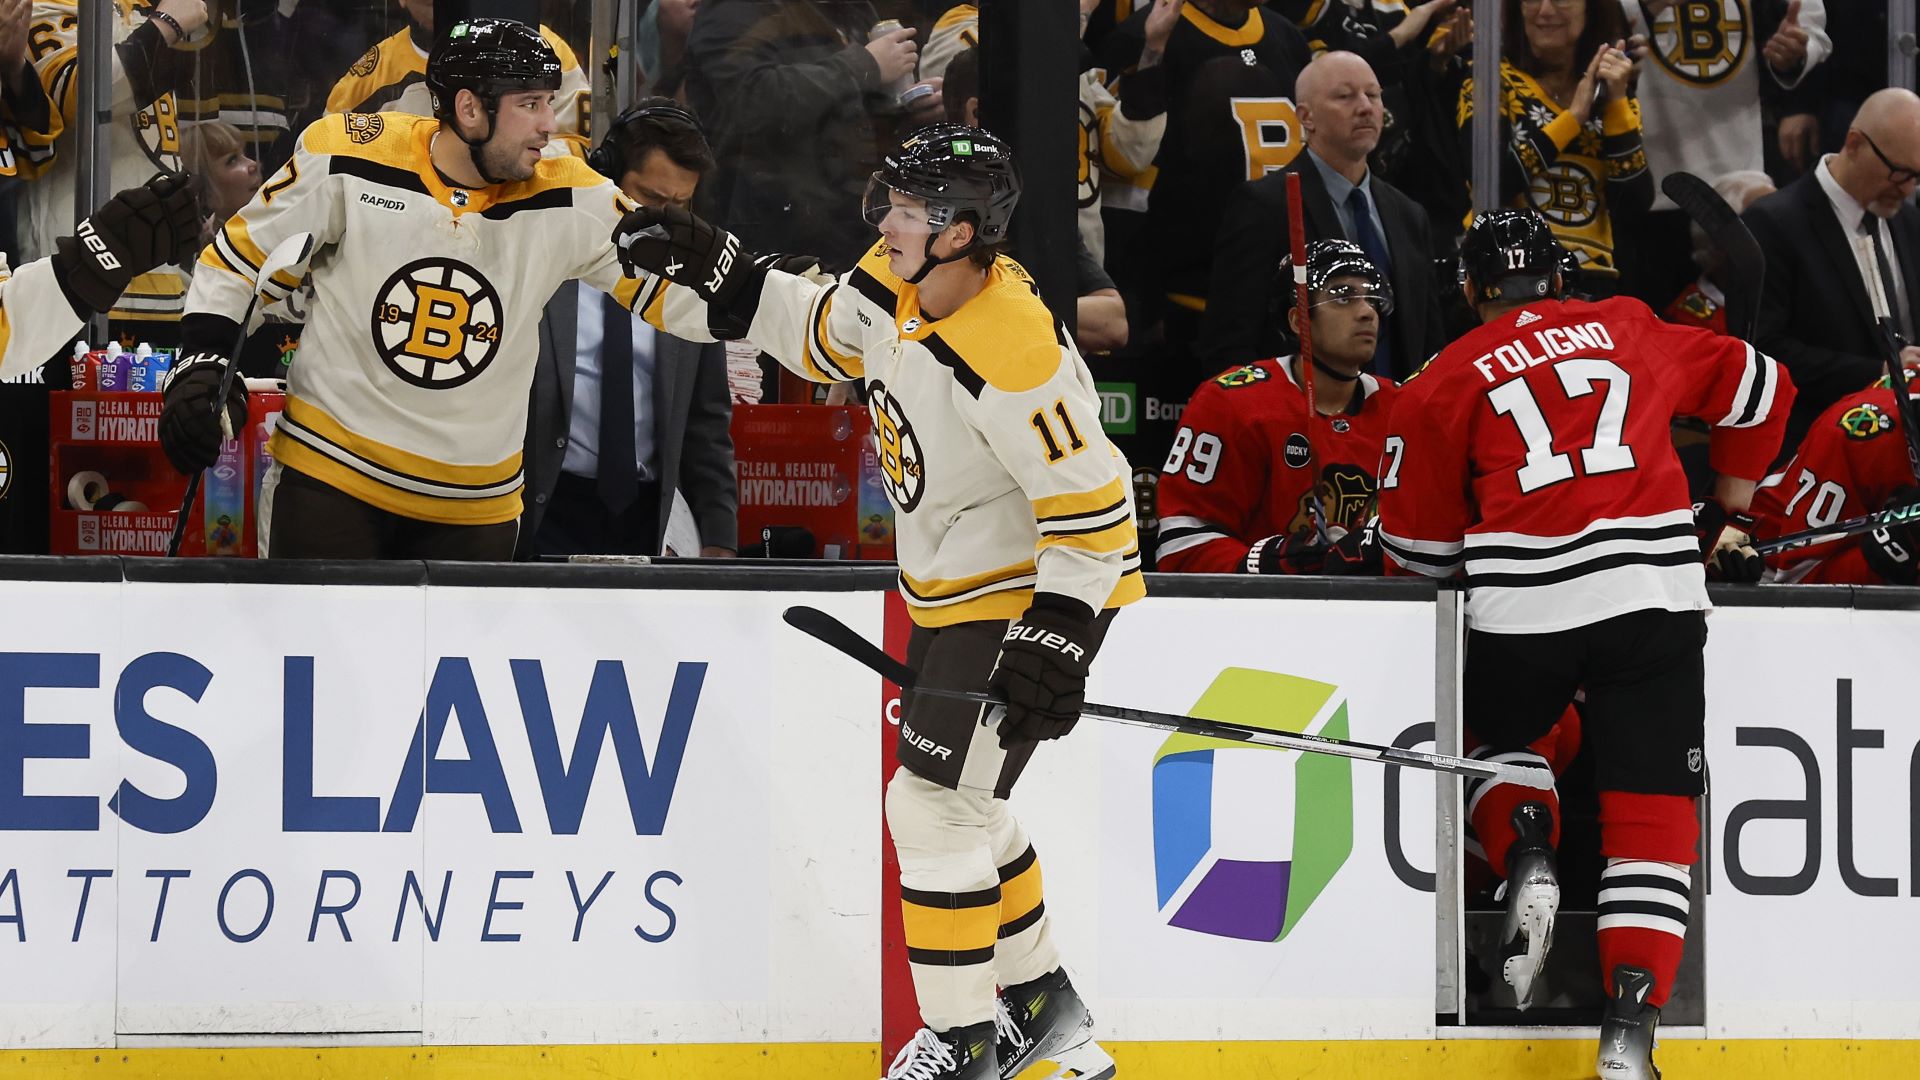 A magical night at Garden as Bruins' Charlie Coyle scores one for